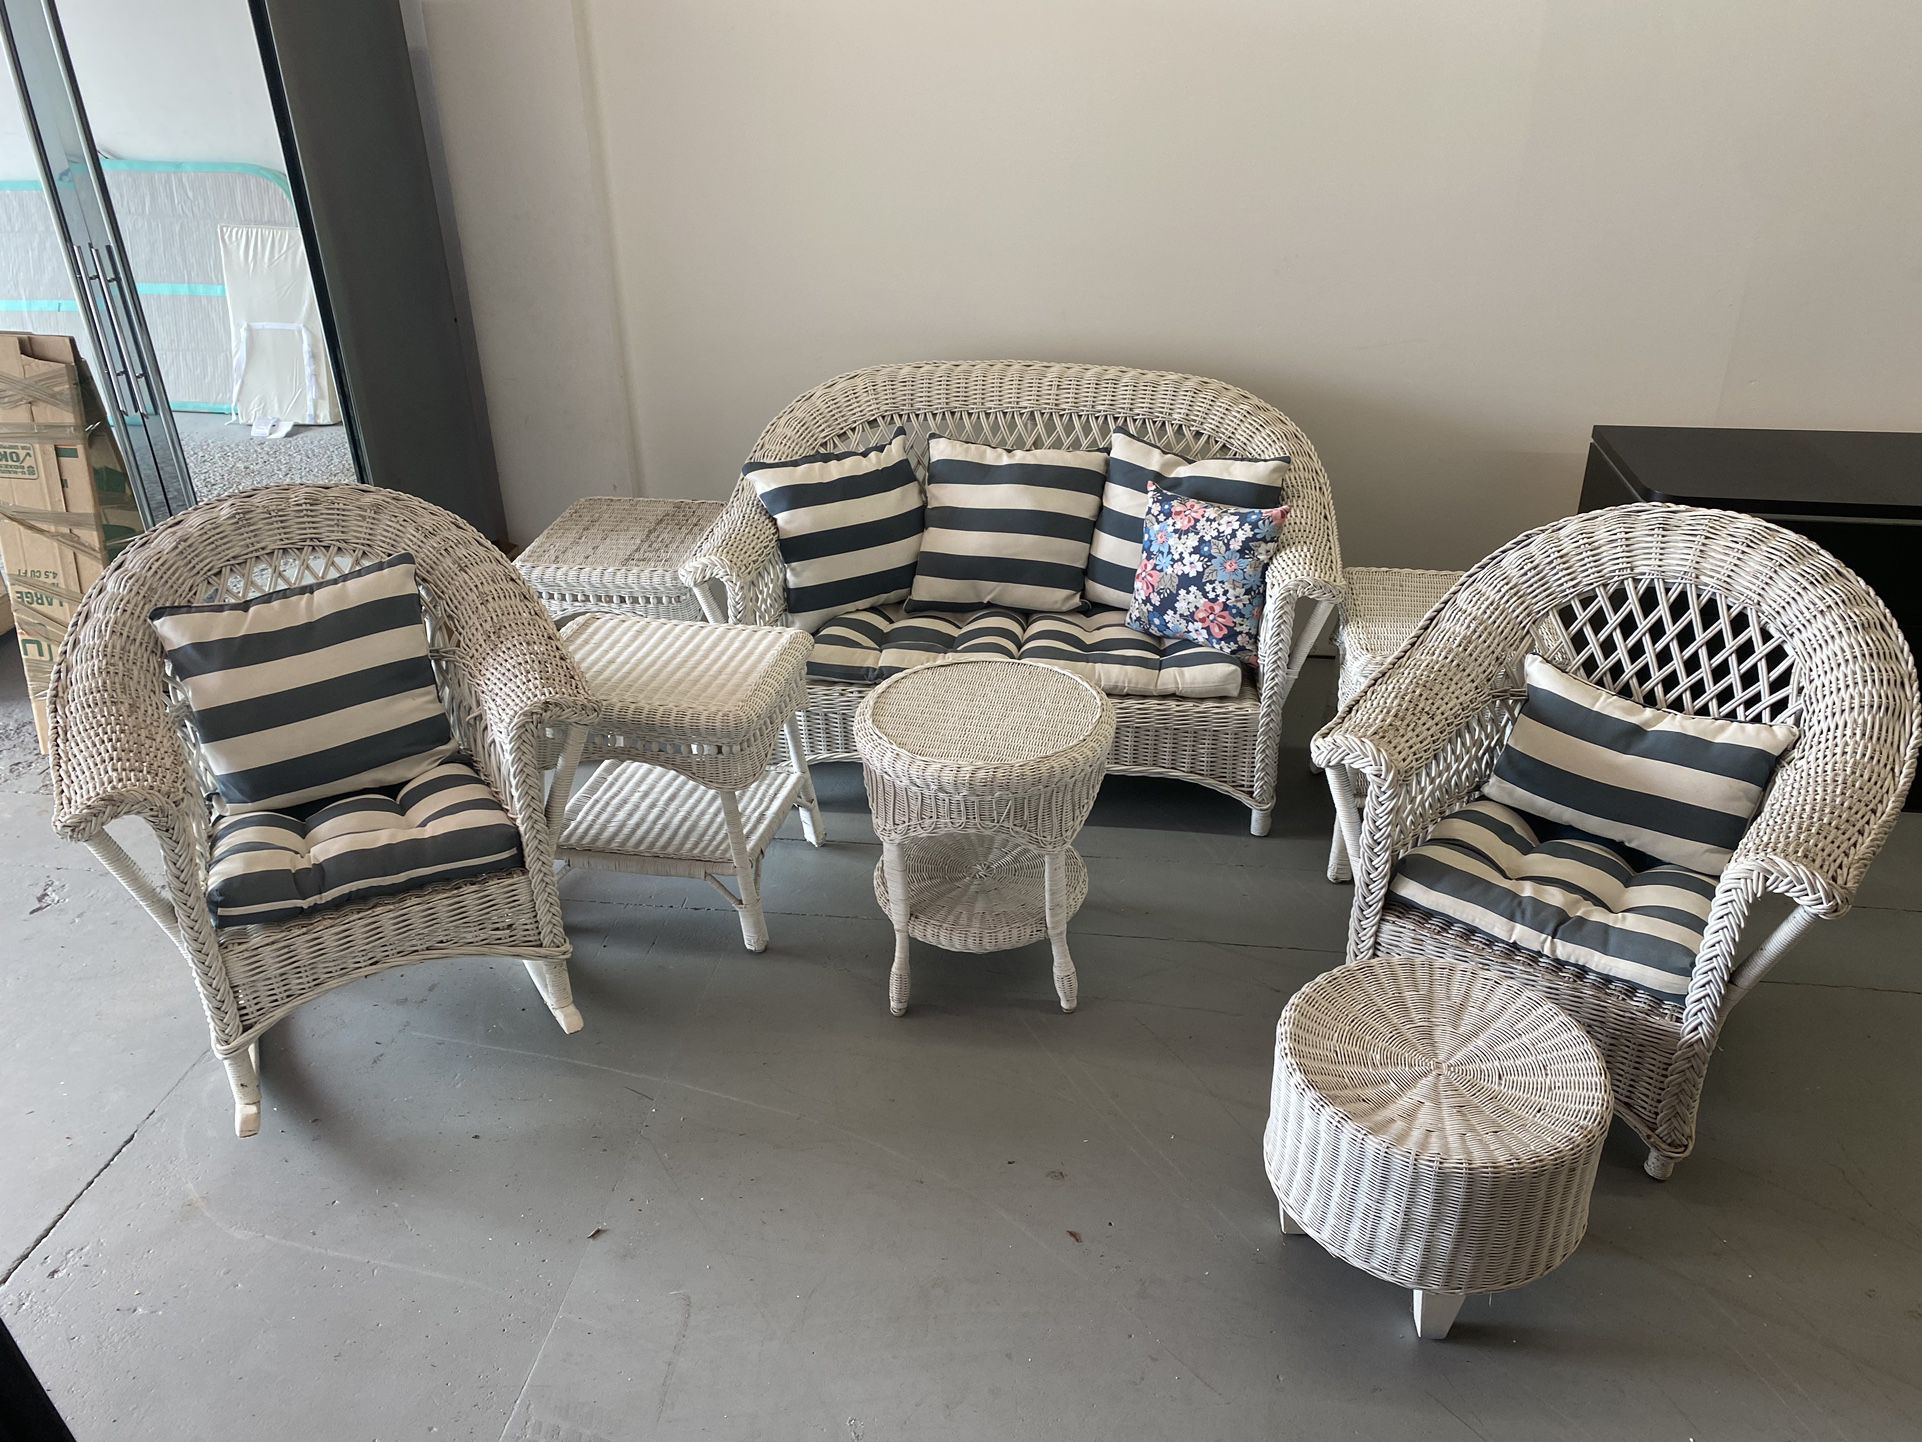 8 PIECE WICKER SET with Cushions 